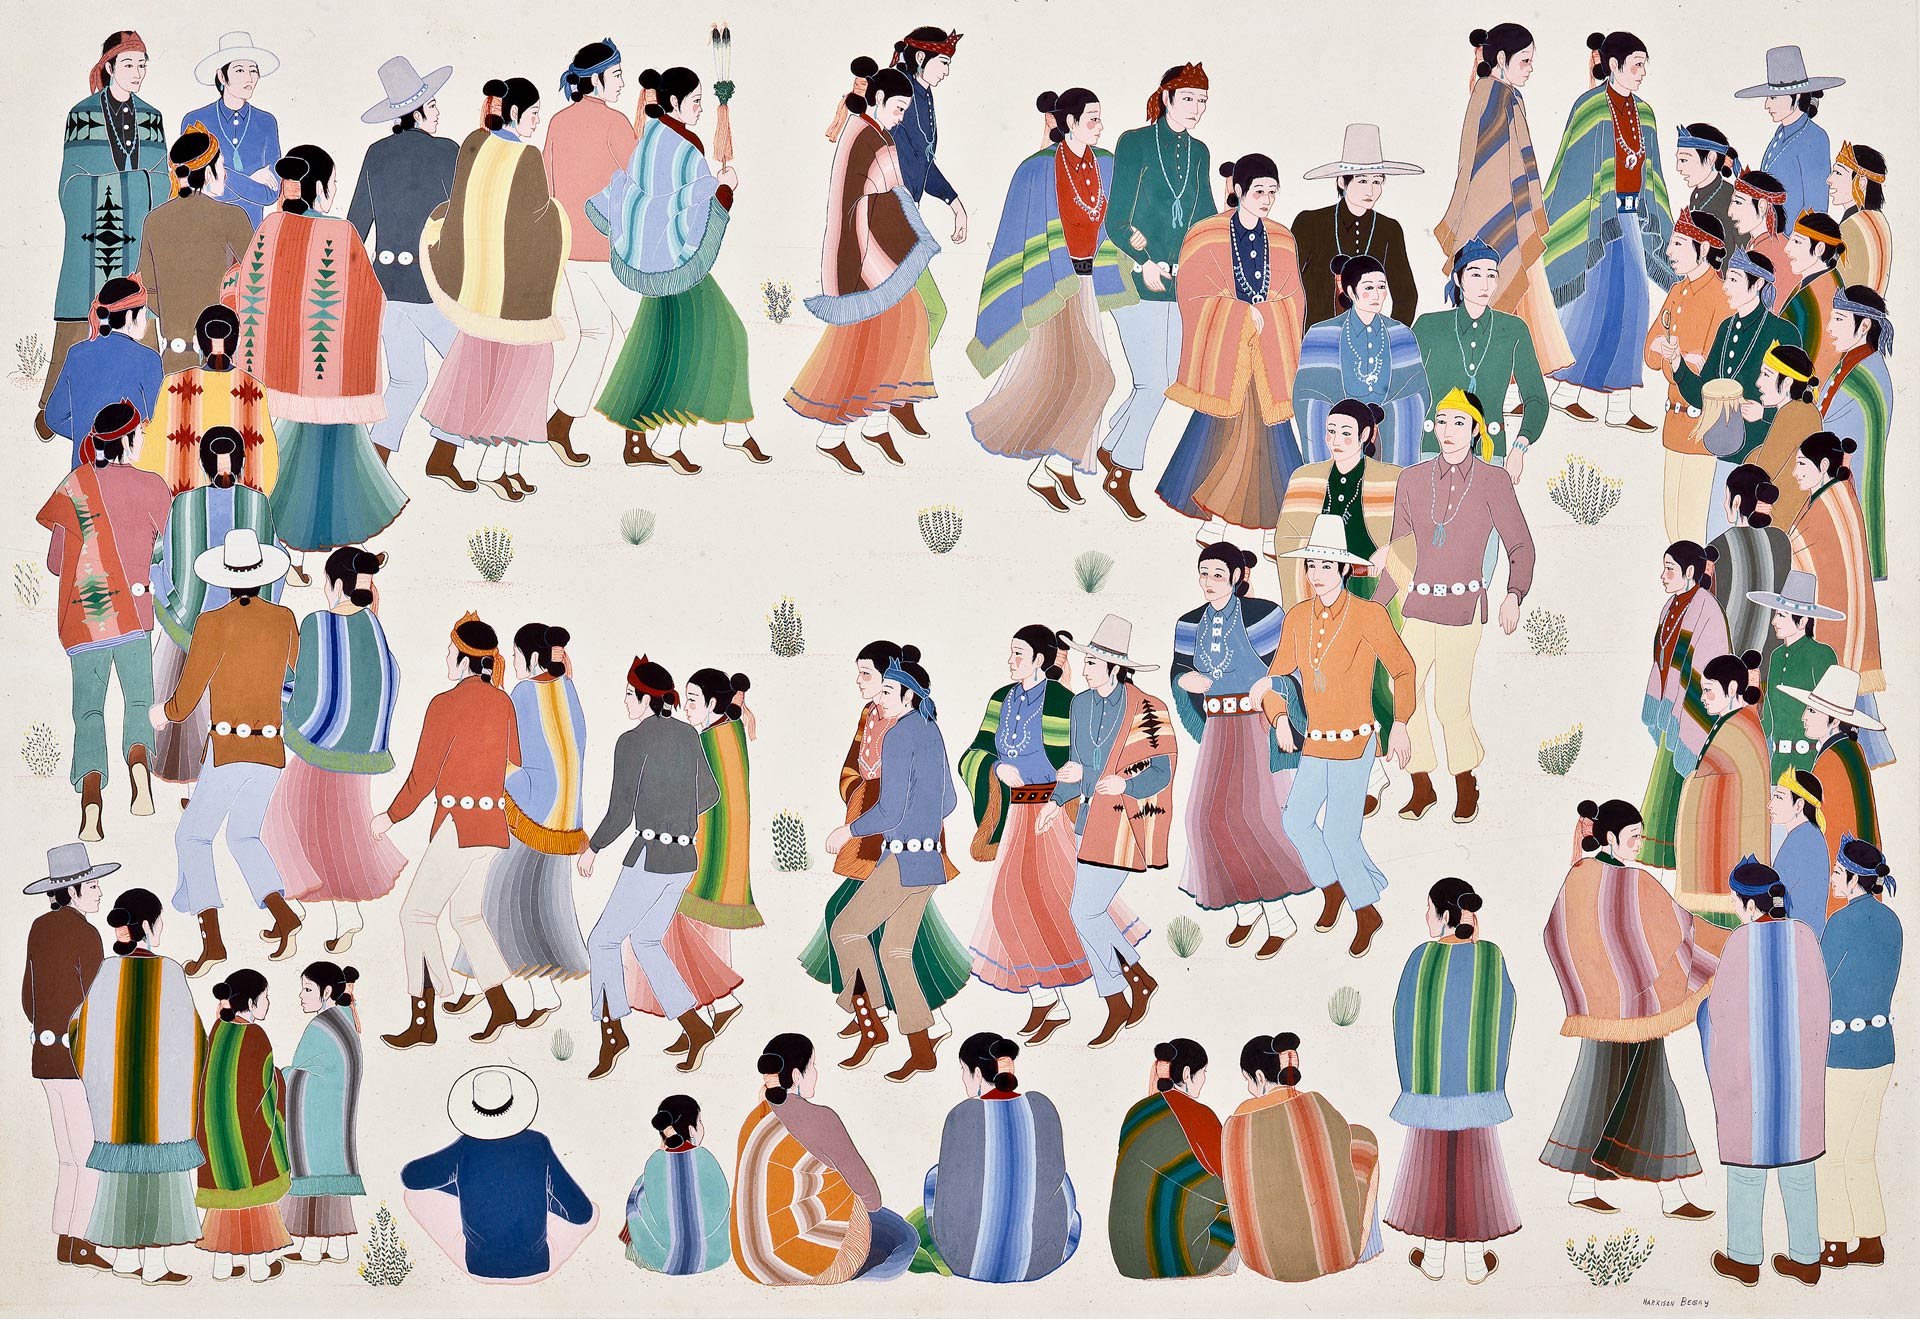 A painting of a group of people dancing in pairs dressed in different colors.